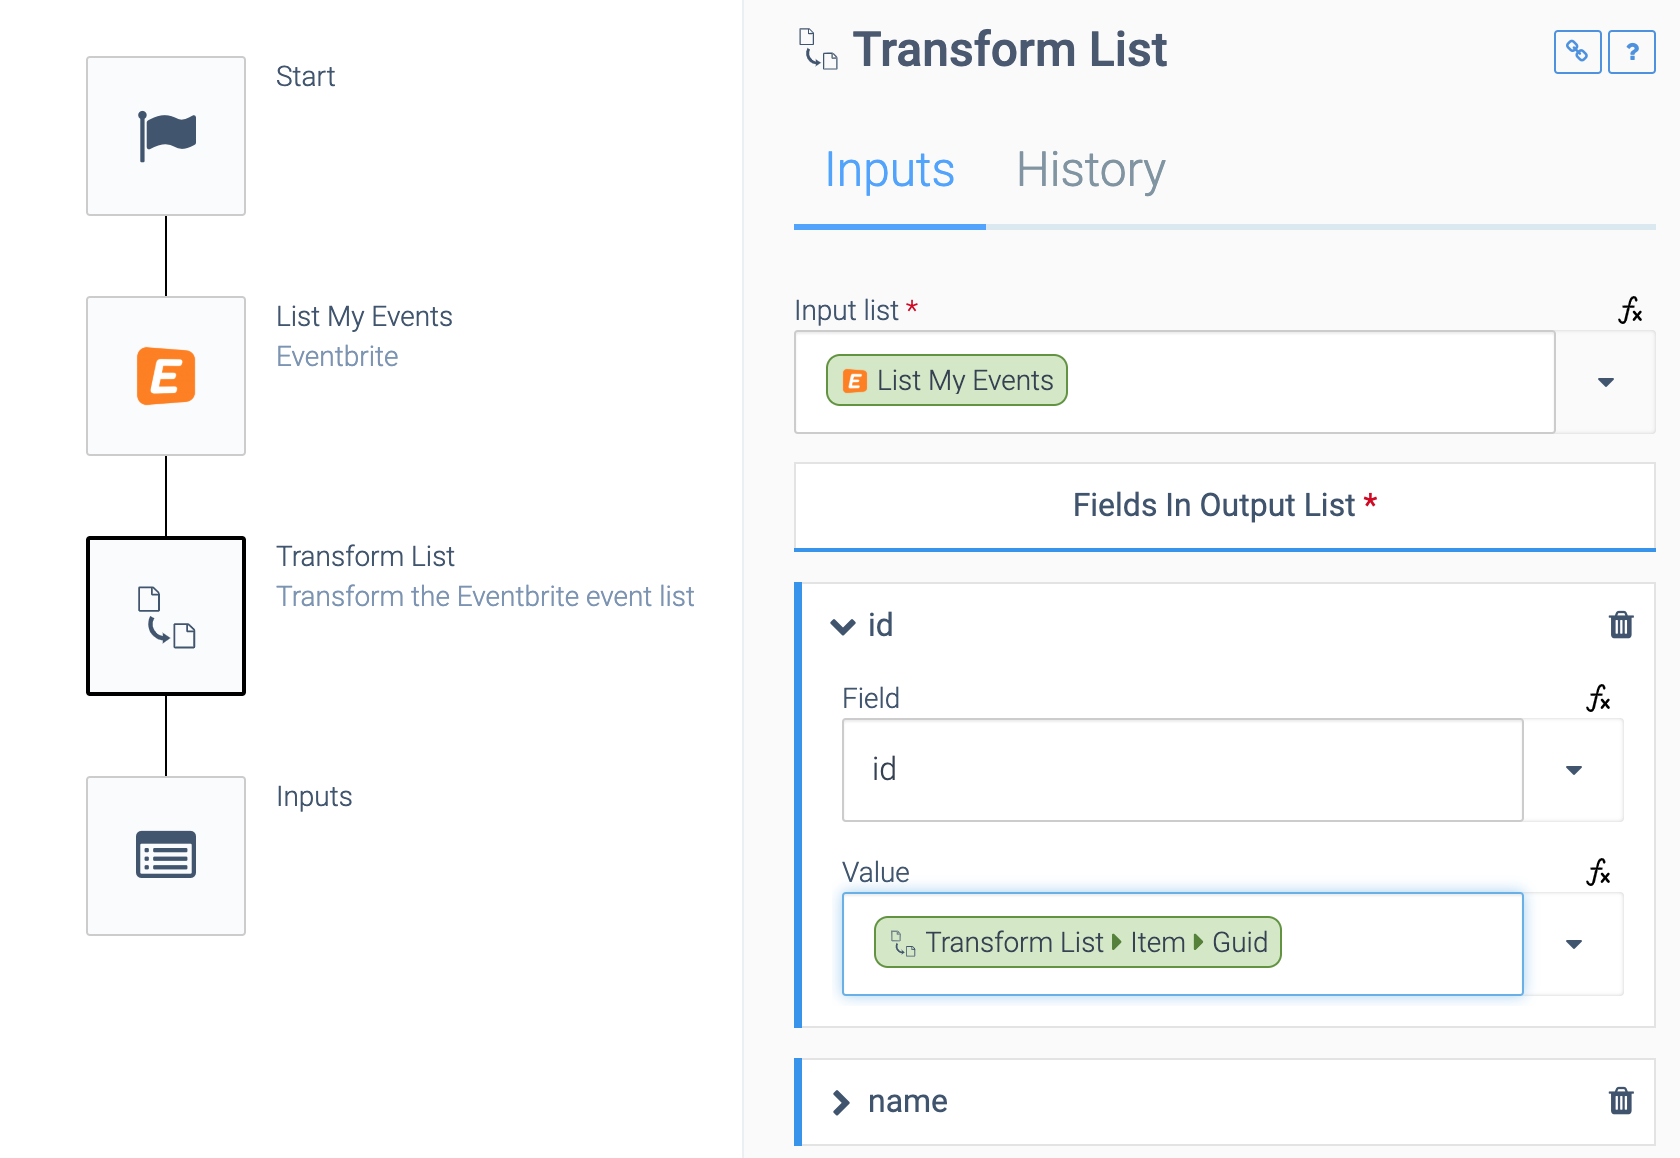 As above, but the Transform List block is selected. The Input list is set to List My Events, and the Value field under the Fields in Output List dropdown is set to Transform List > Items > Guid.